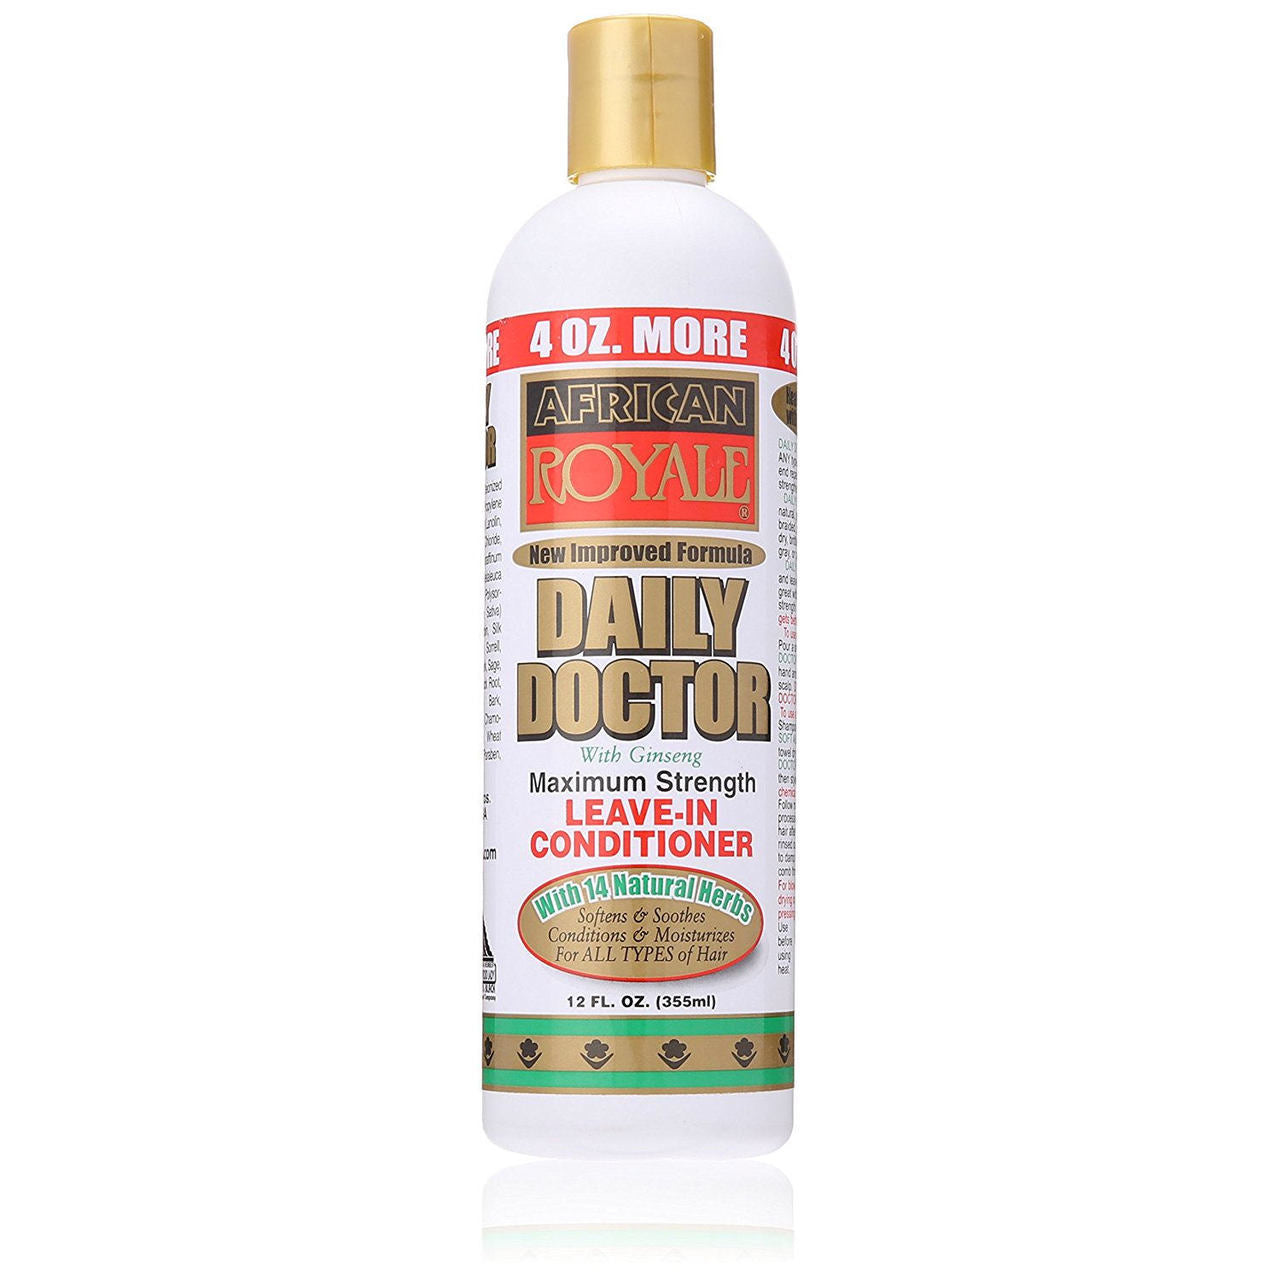 African Royale: Daily Docter Leave In Conditioner